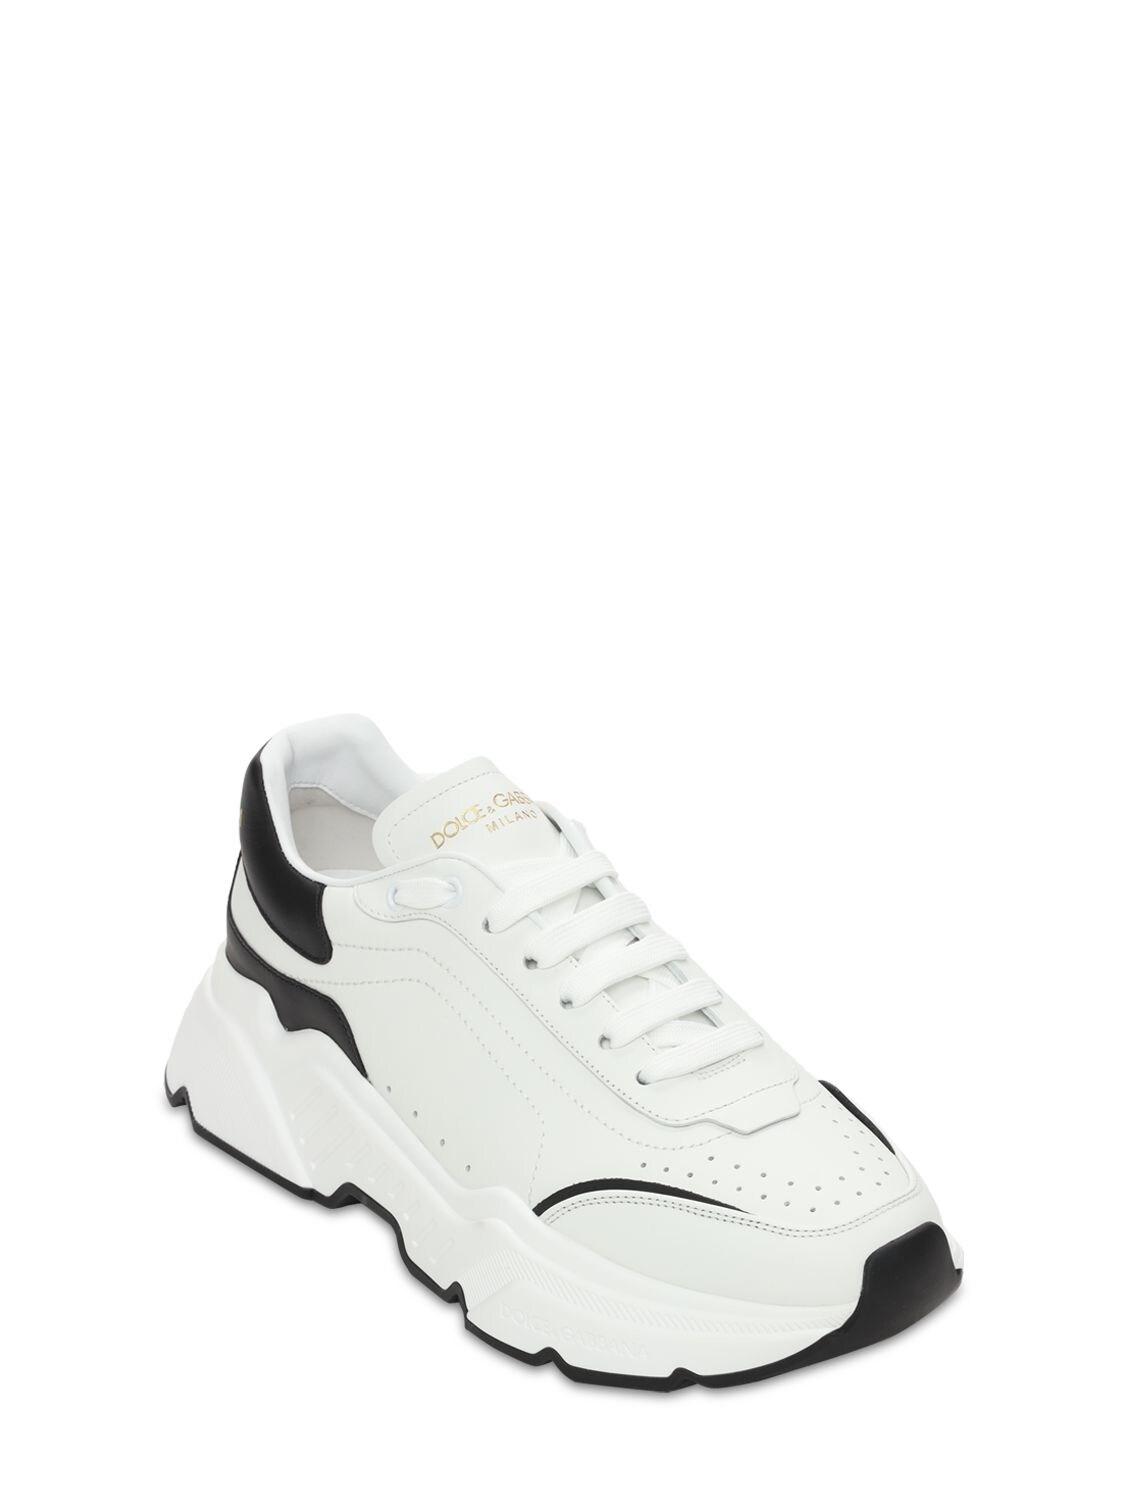 Dolce & Gabbana Leather Daymaster Sneakers In Nappa Calfskin for 